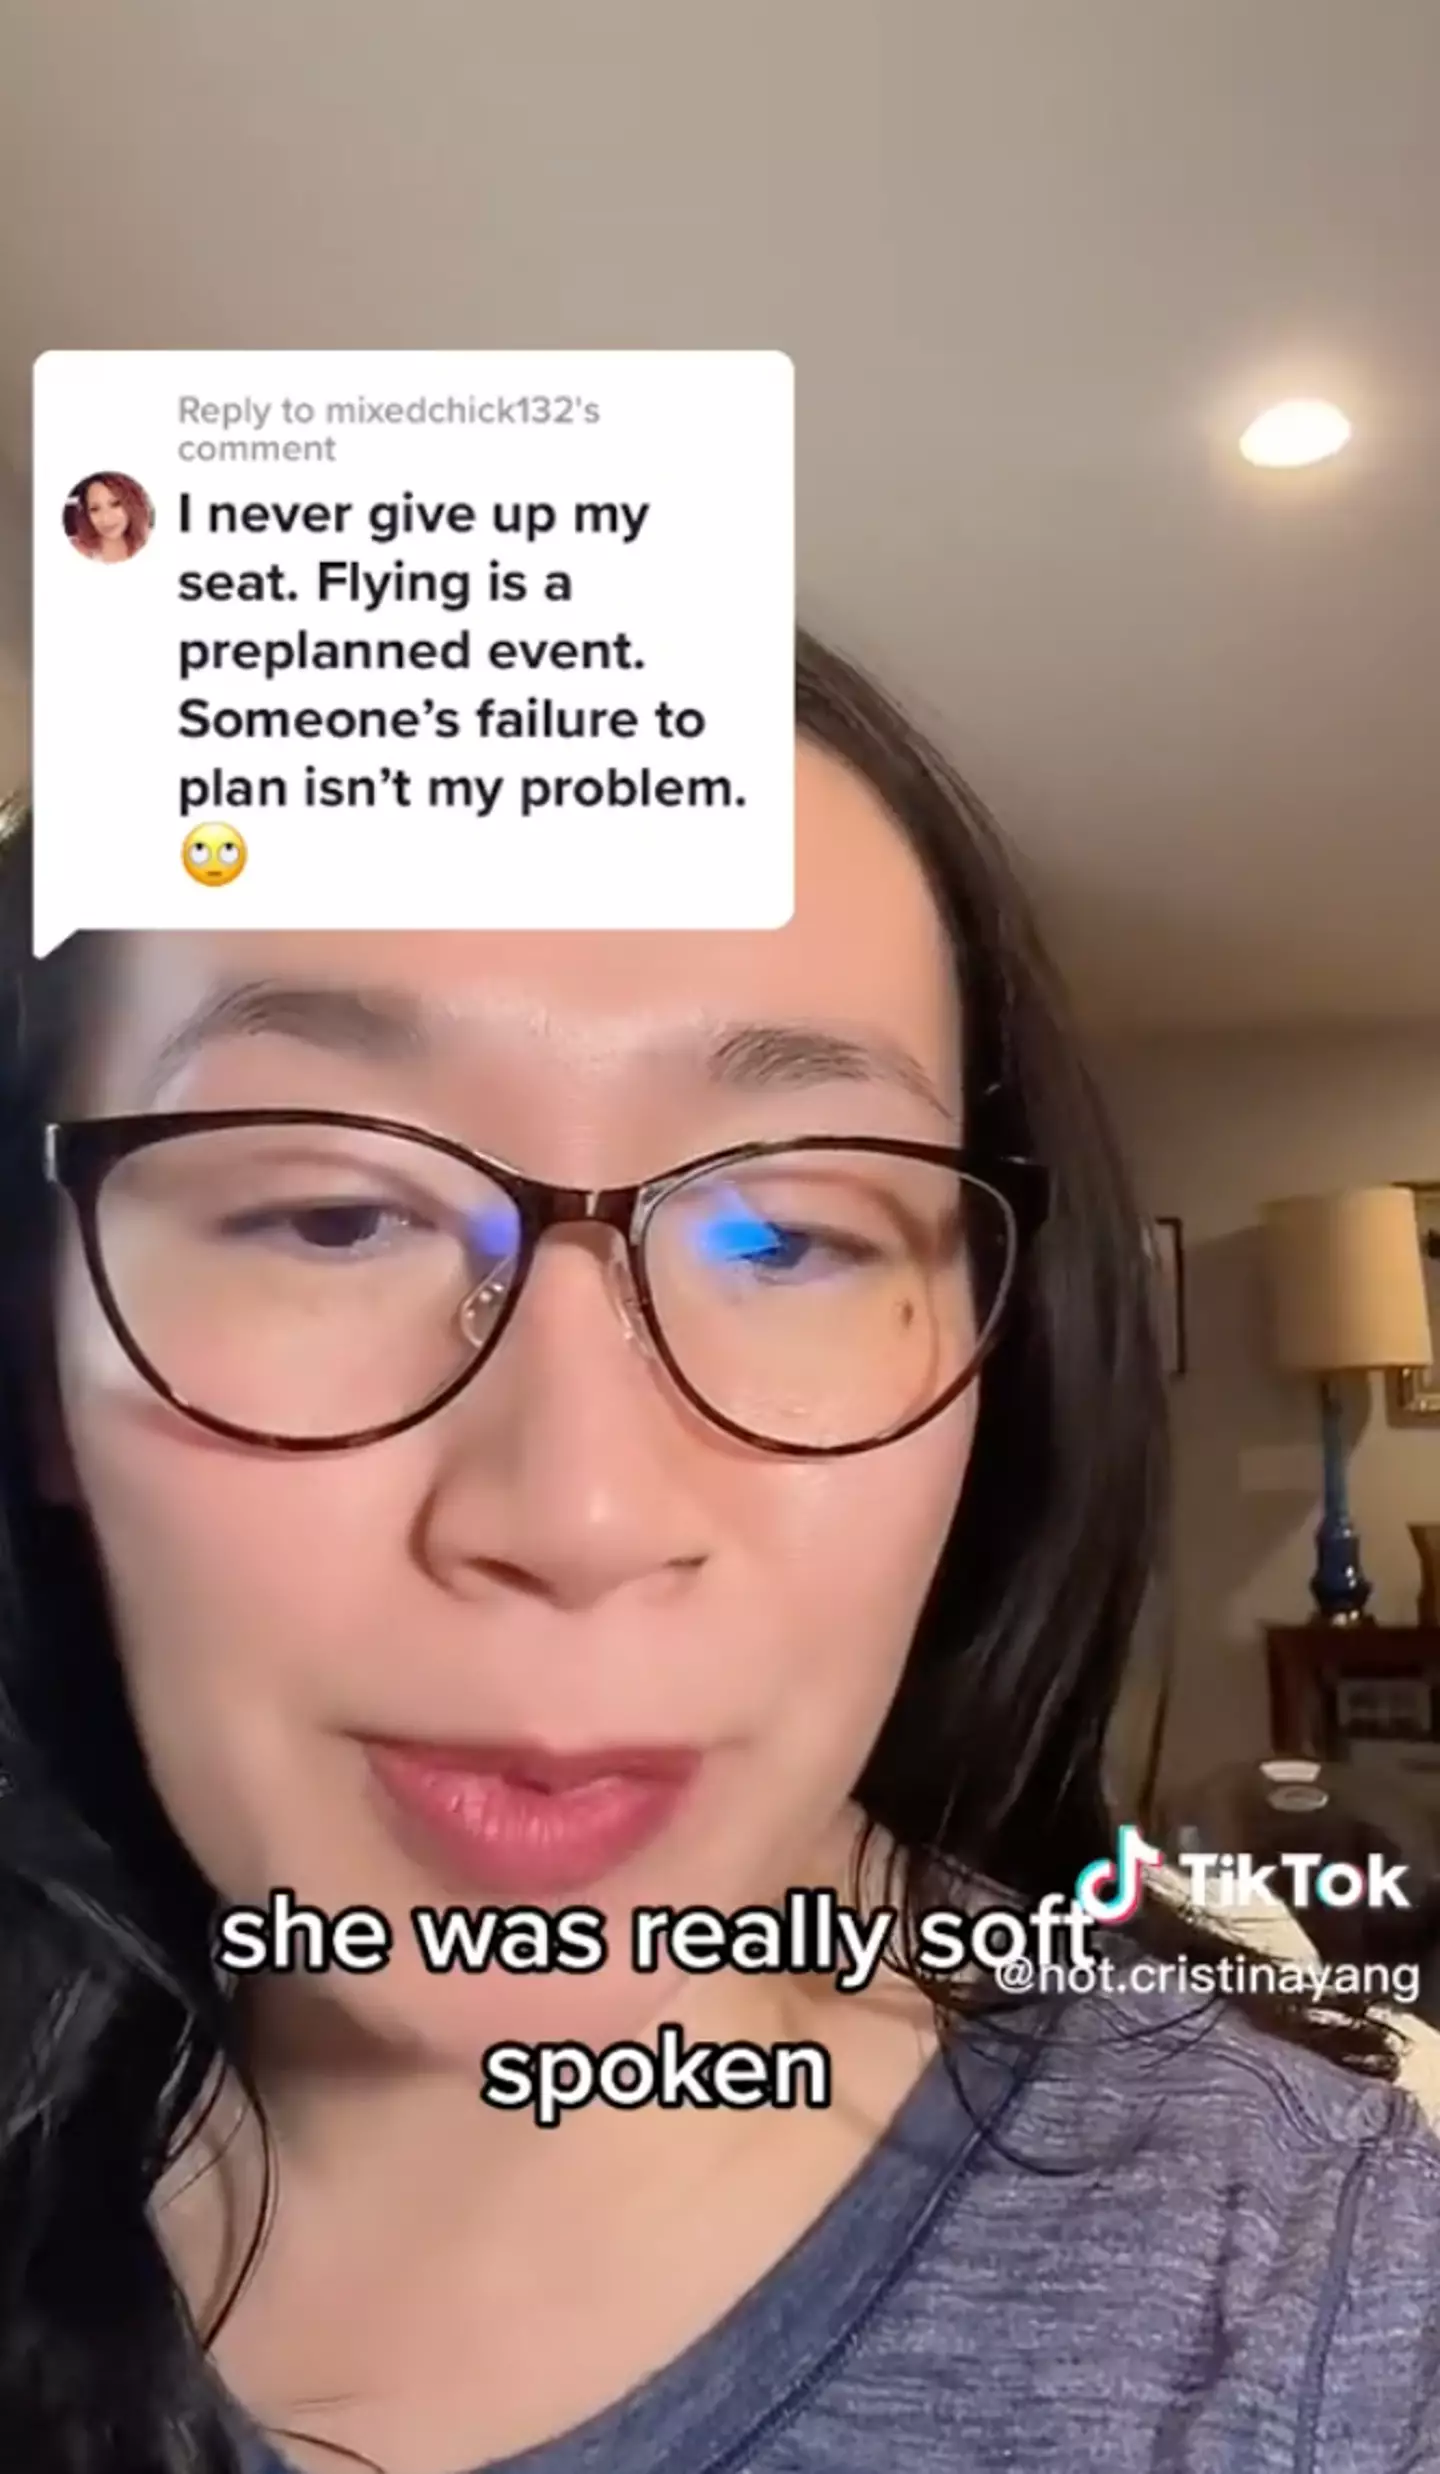 The TikToker explained how she was sitting in a premium economy seat during a flight from Hawaii to Seattle.